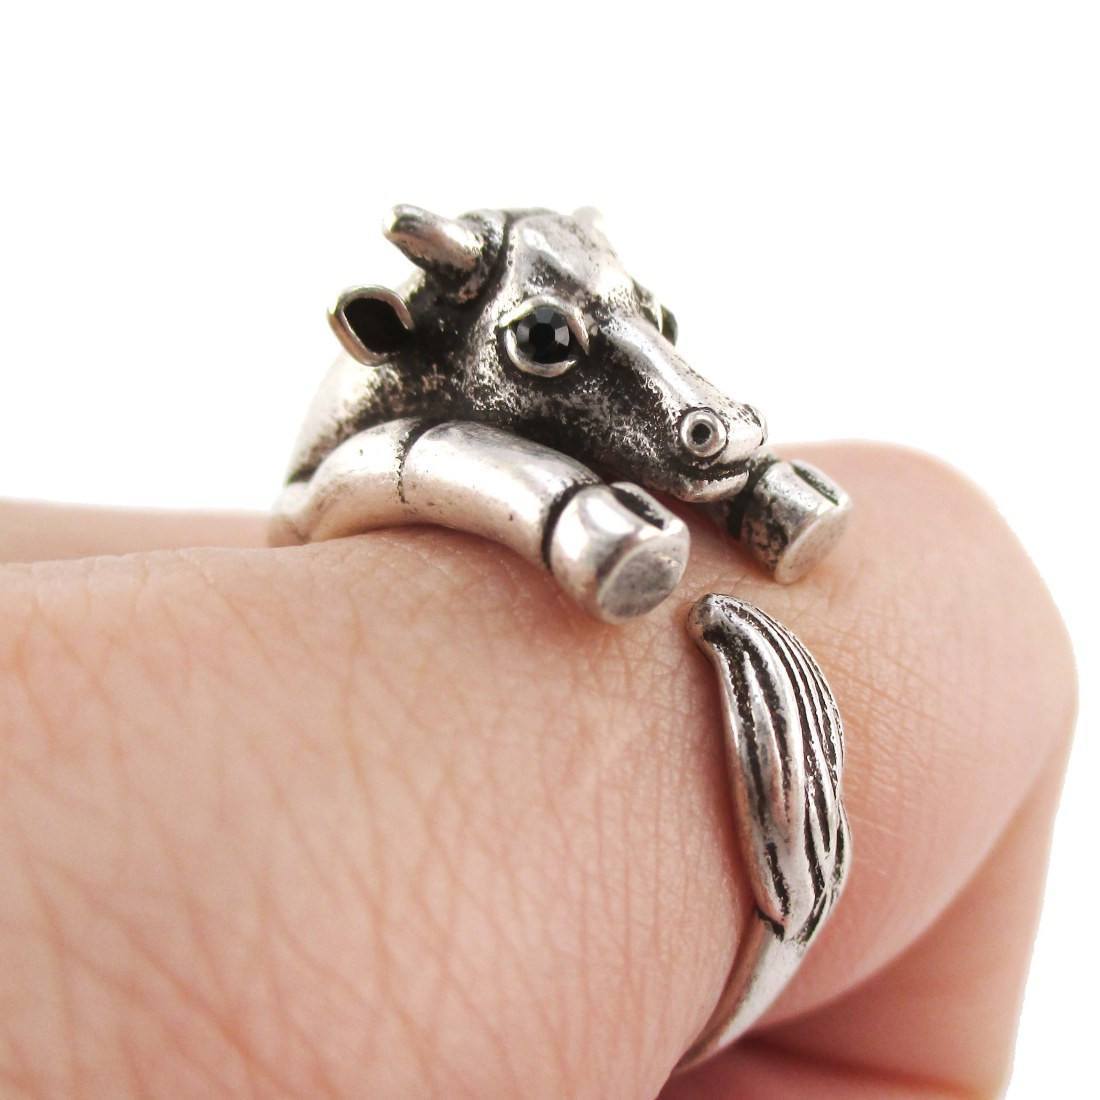 Taurus Bull Cow Shaped Animal Hugging Your Finger Ring in Silver | US Size 5 to 8